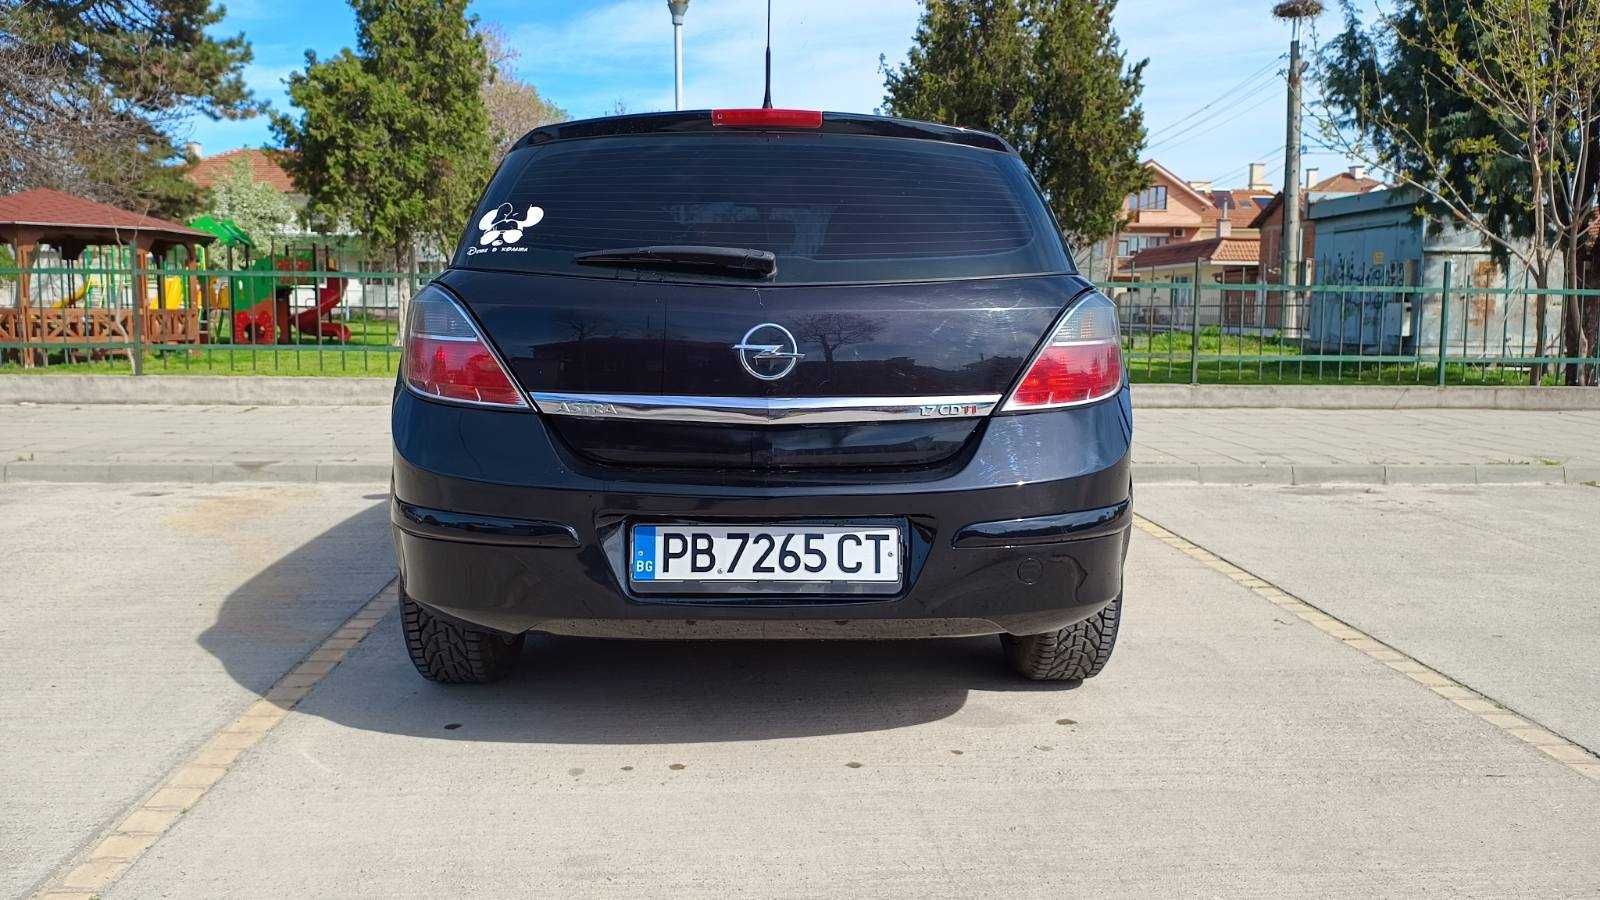 Opel Astra H 1,7. CDTI 125hp 2008г. Дизел